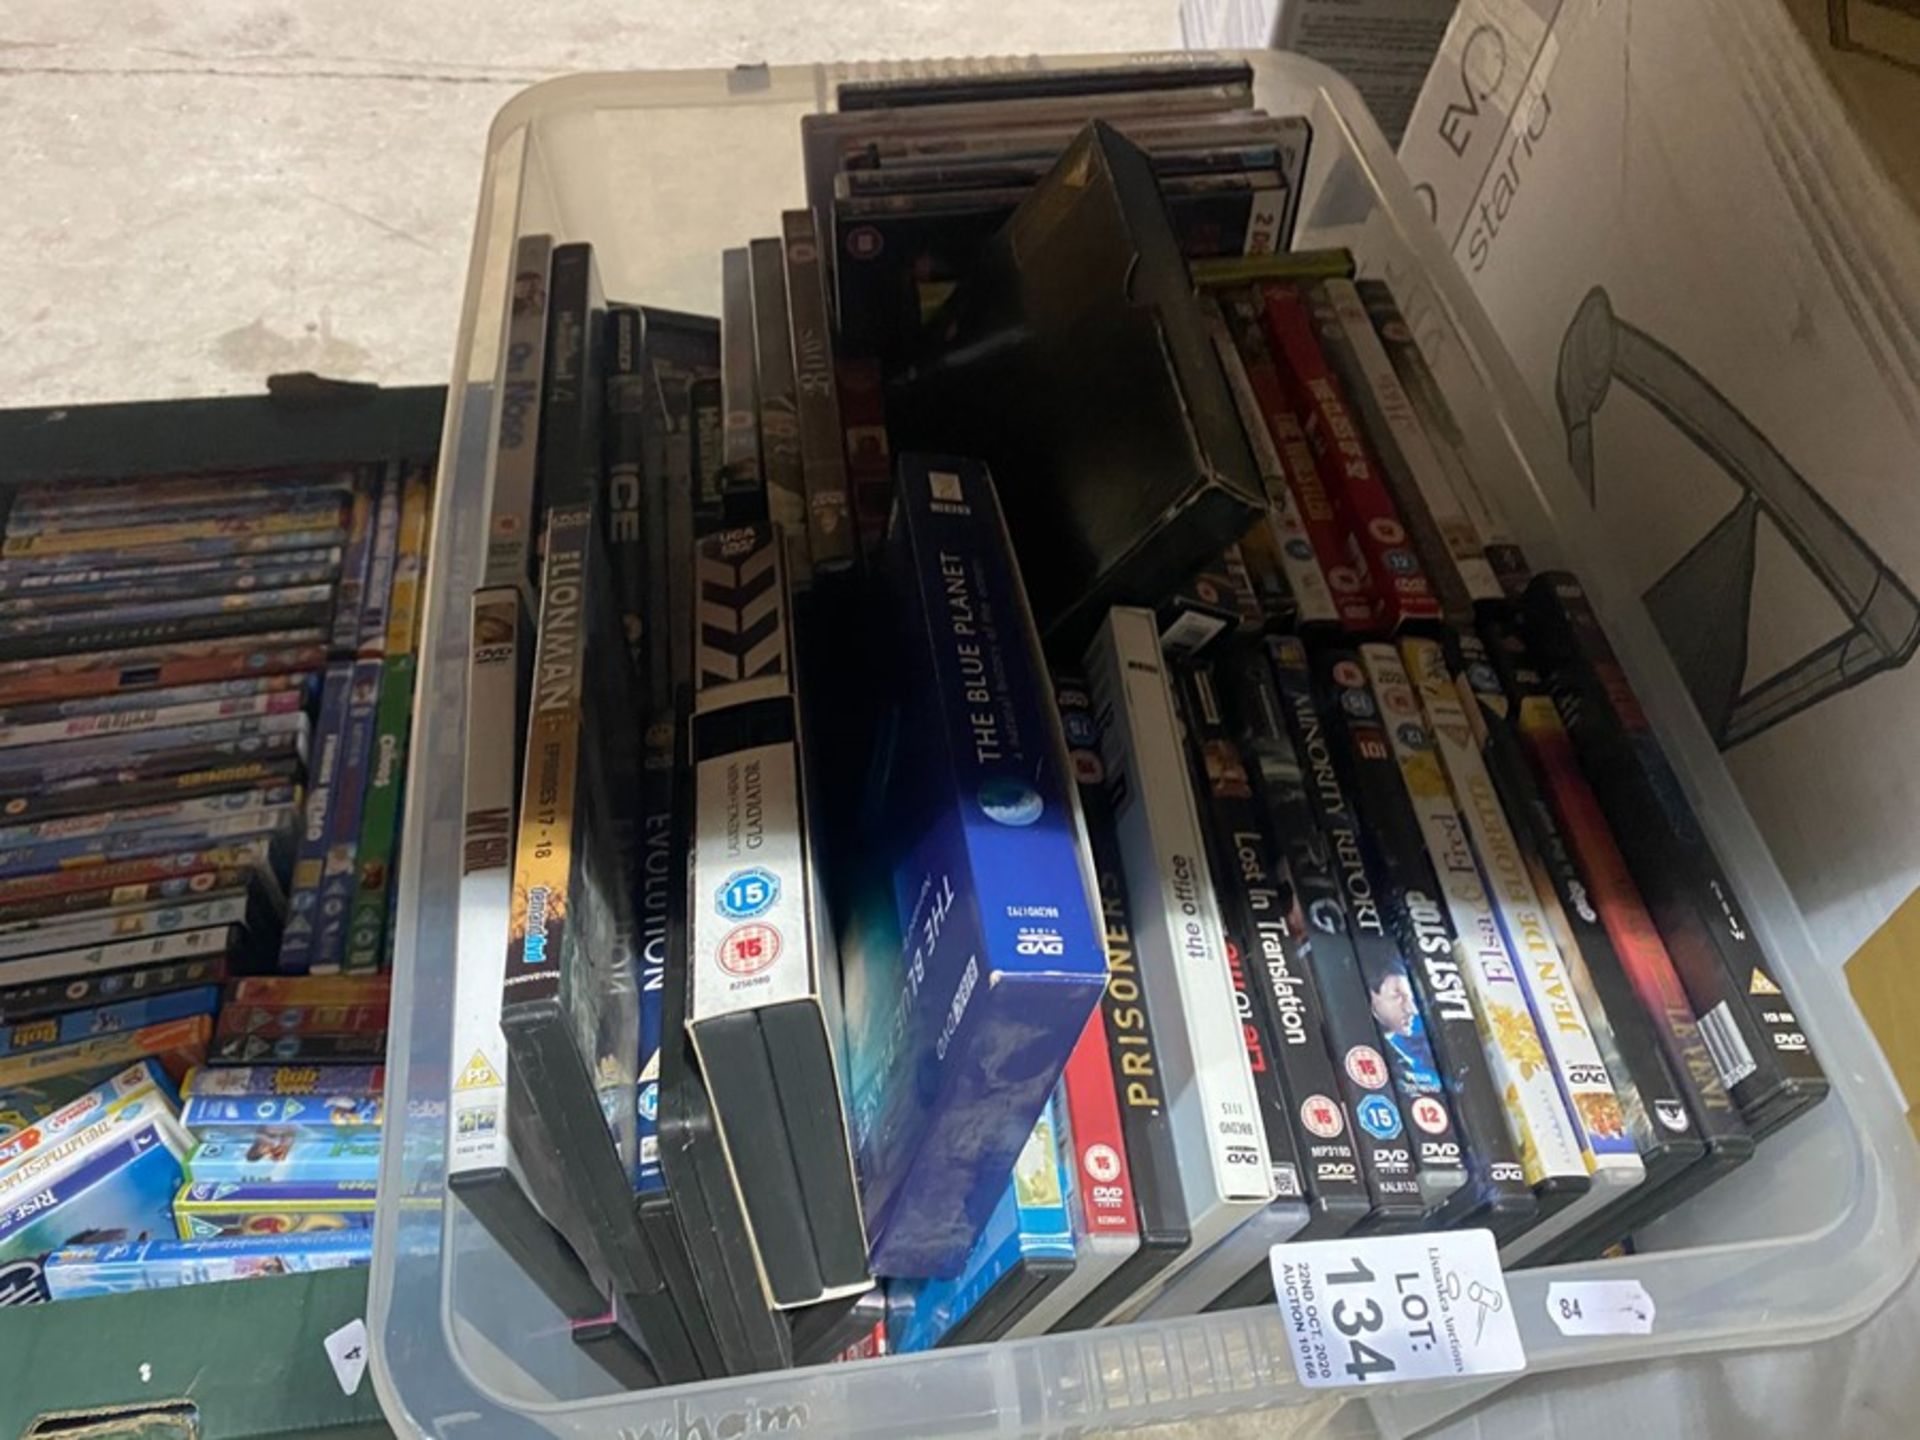 TUB OF DVDS